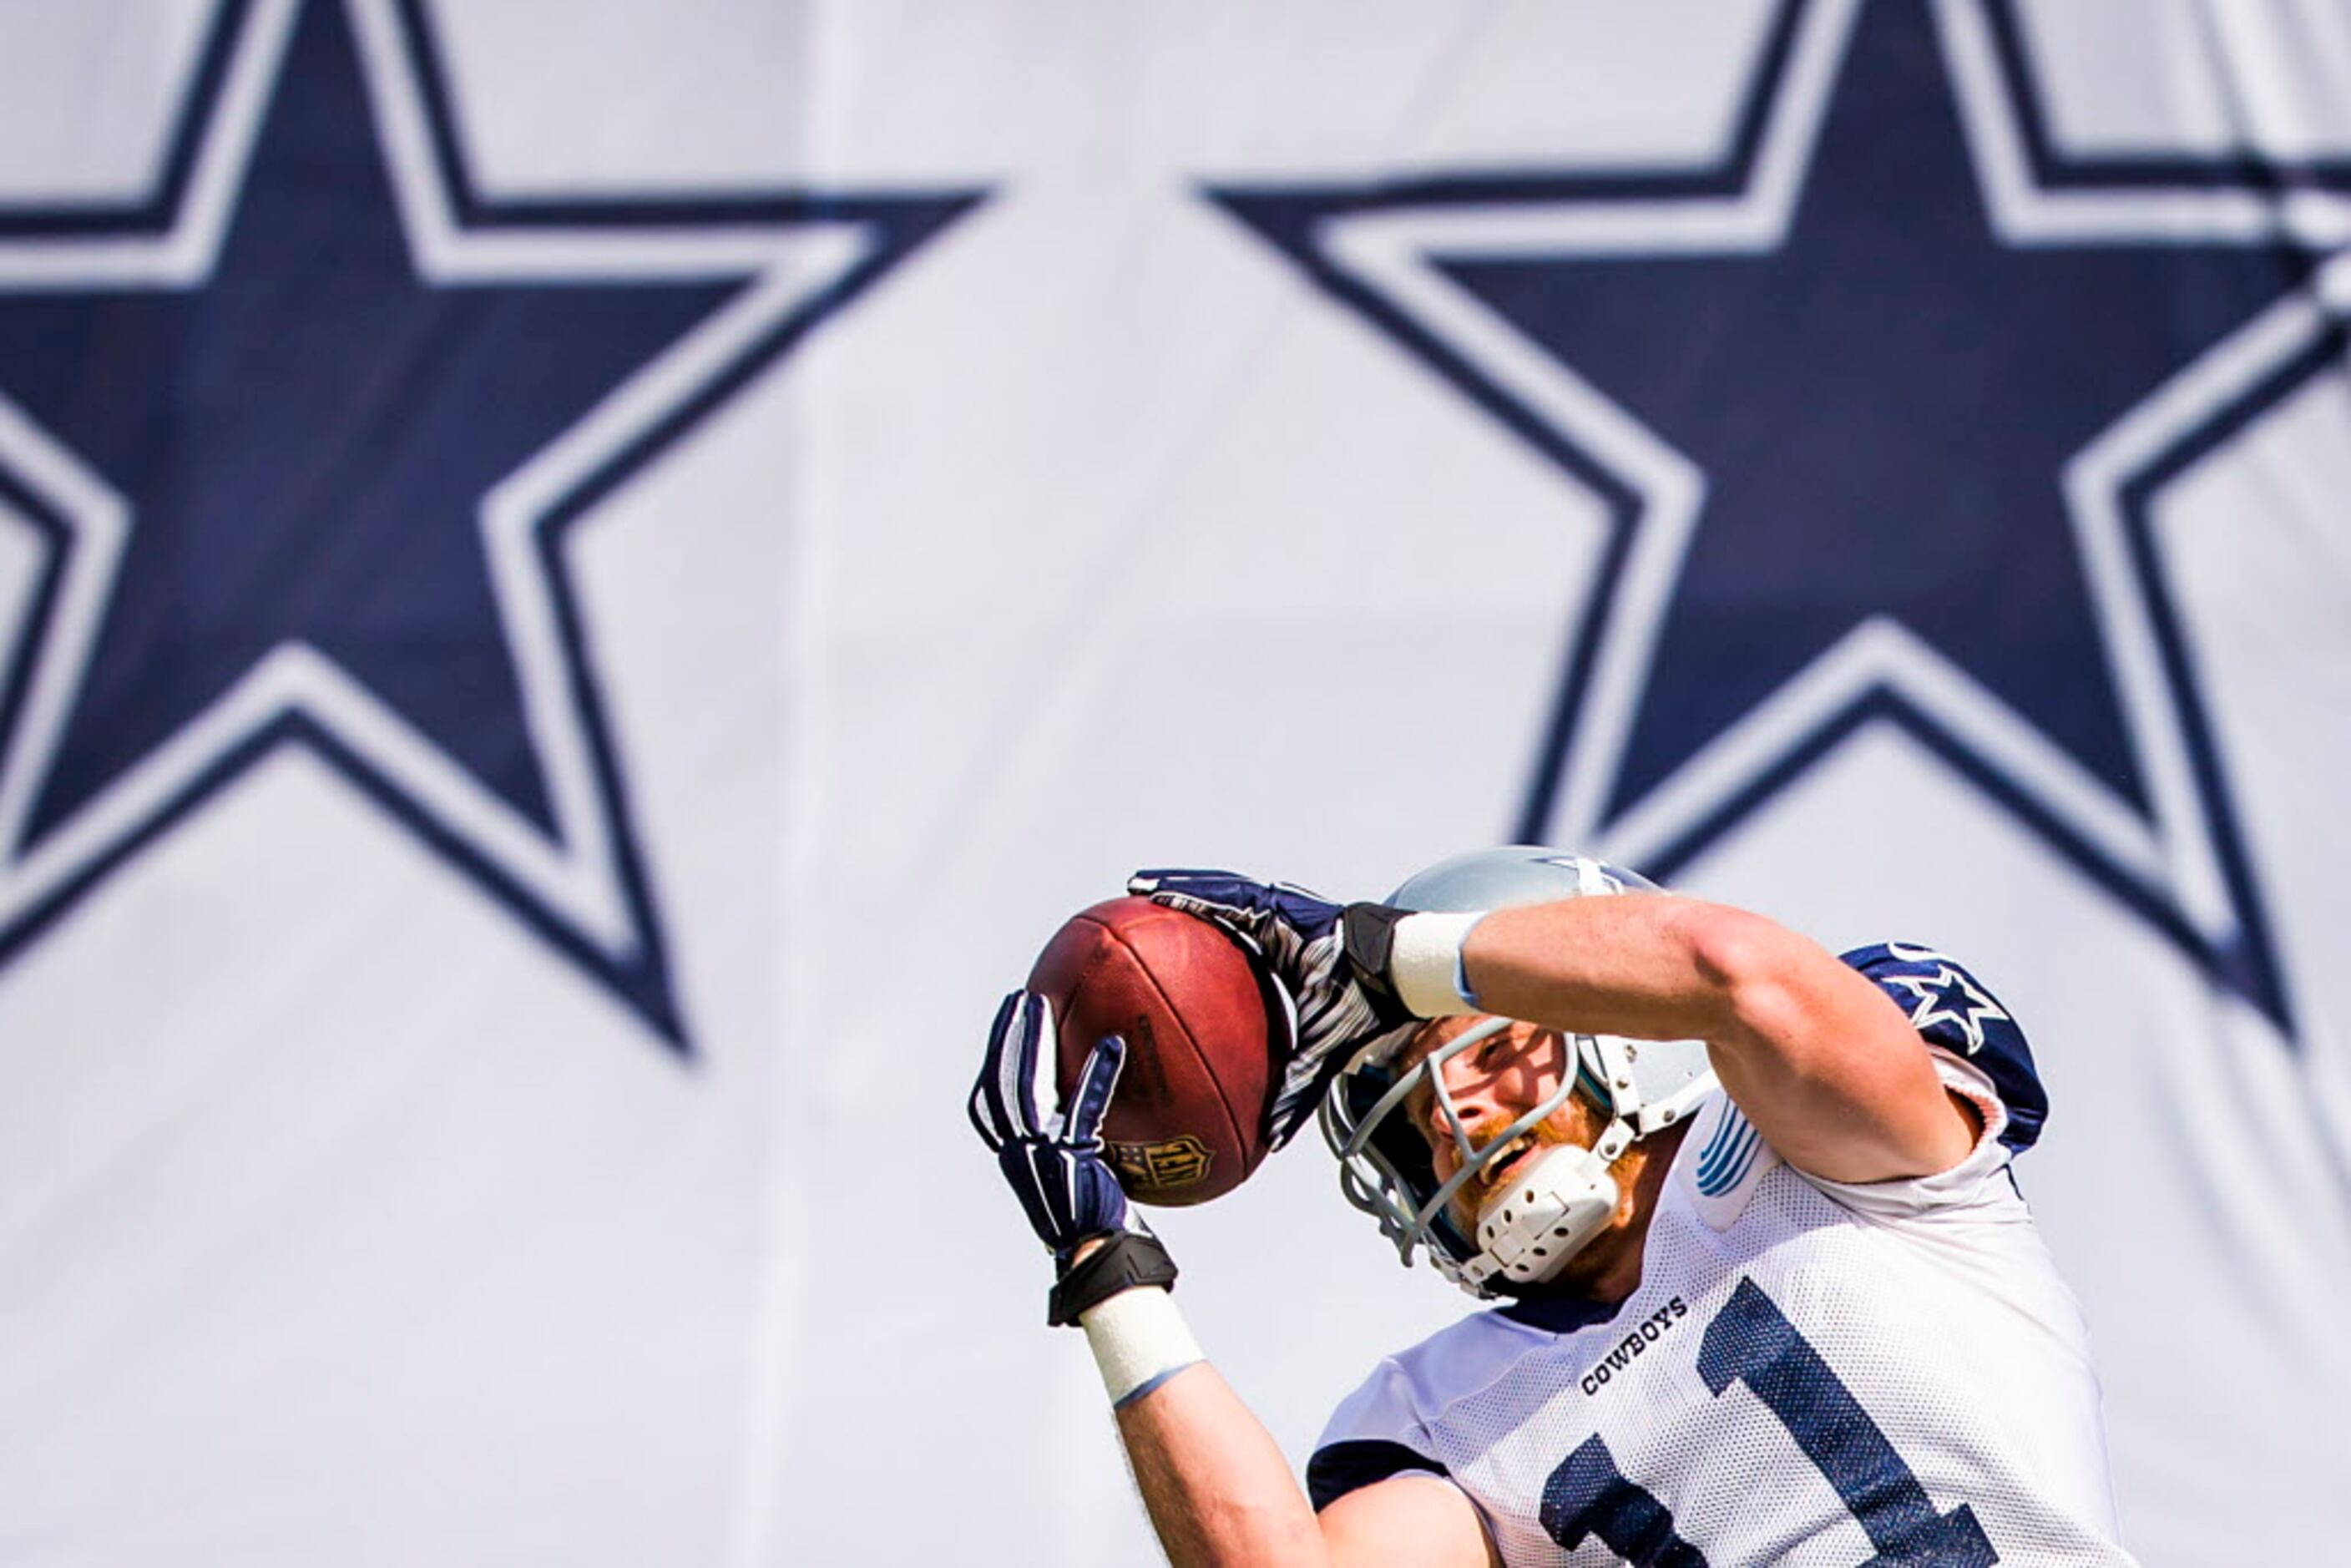 USA Today: Dallas Cowboys have the best logo in American sports